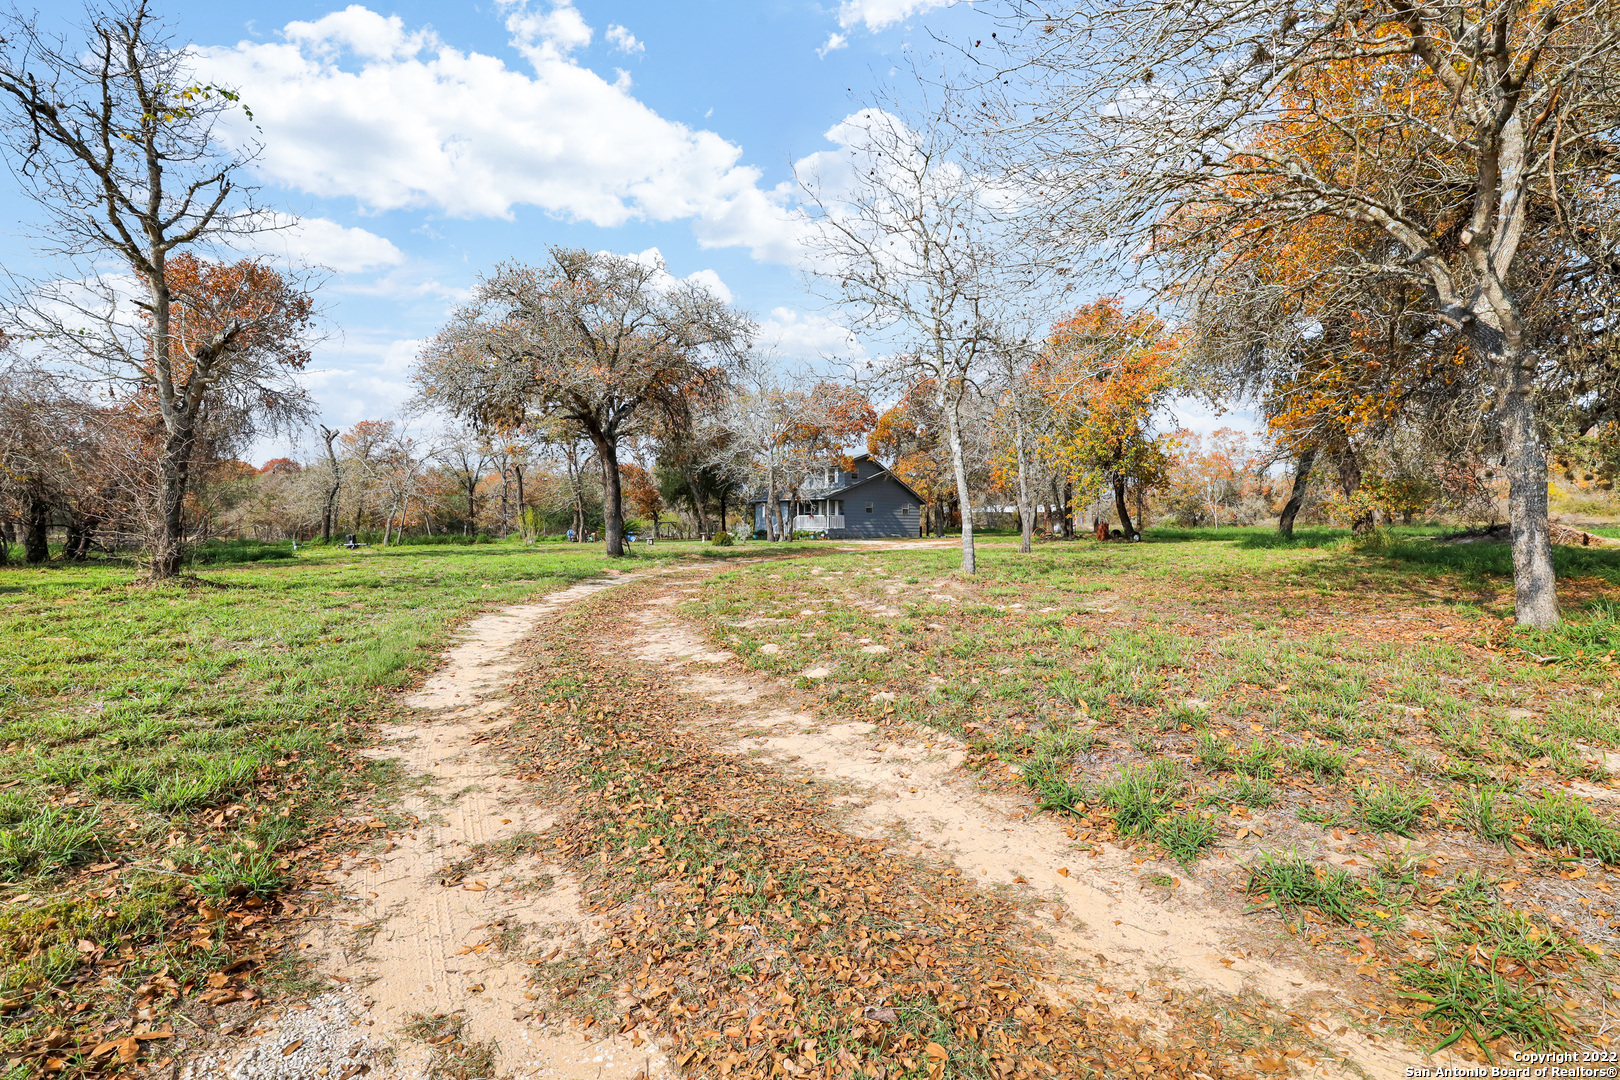 This charming 3 bedroom house sits on 7.129 acres. The main house is 1,495 sq ft with master bedroom downstairs, open living room with picture windows. Treed property has Hill Country views for your homestead or weekend retreat.